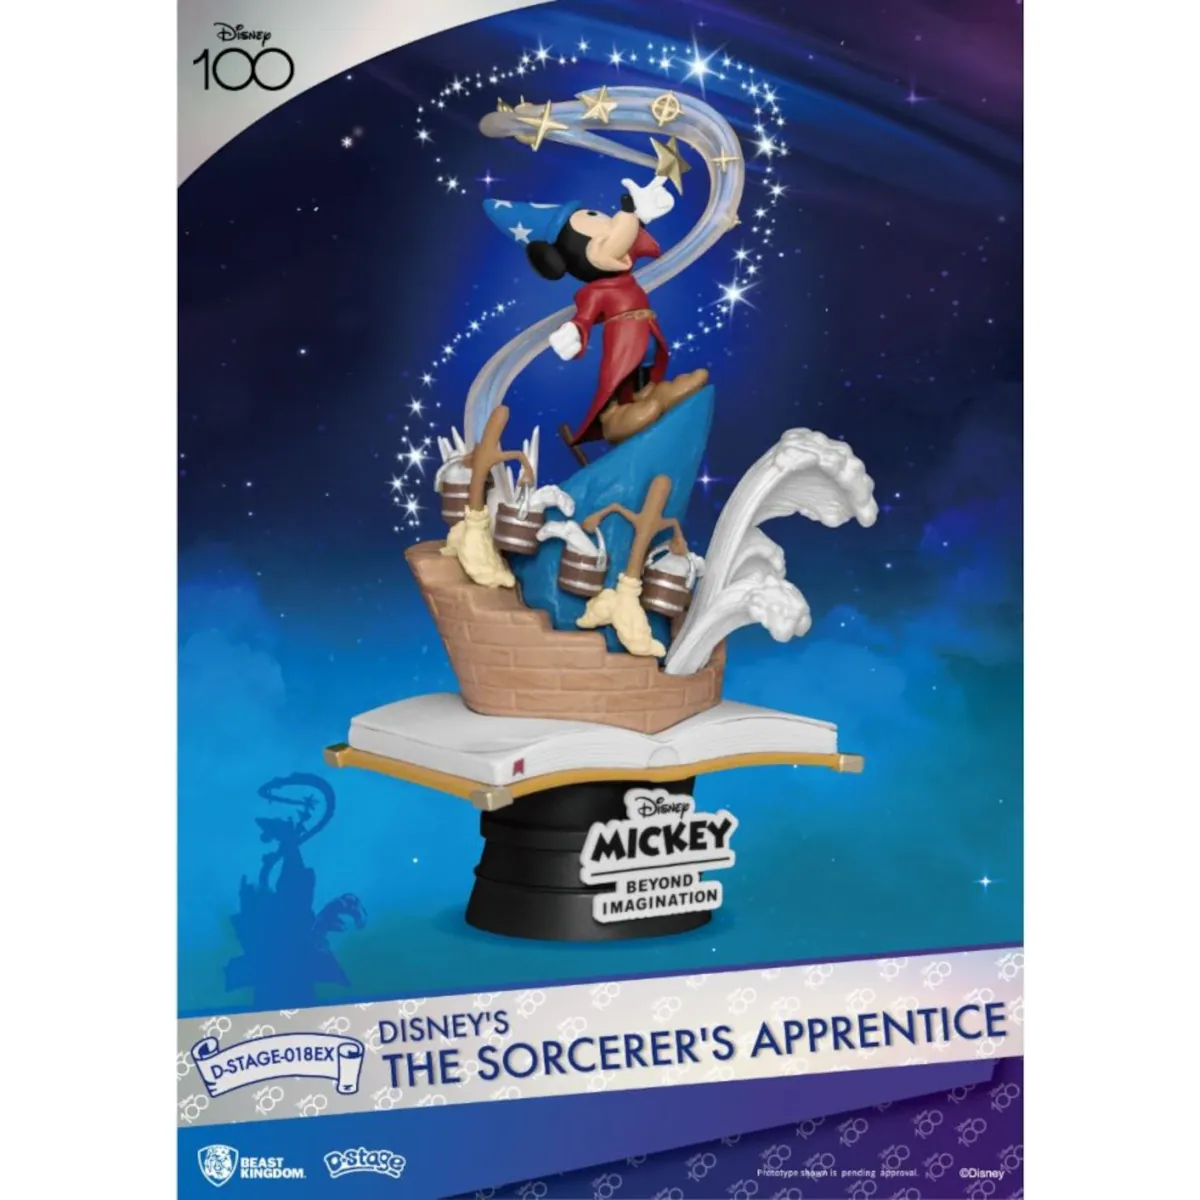 DS-018EX Disney D-Stage 15cm The Sorcerer's Apprentice Mickey Mouse Exclusive Version PVC Diorama